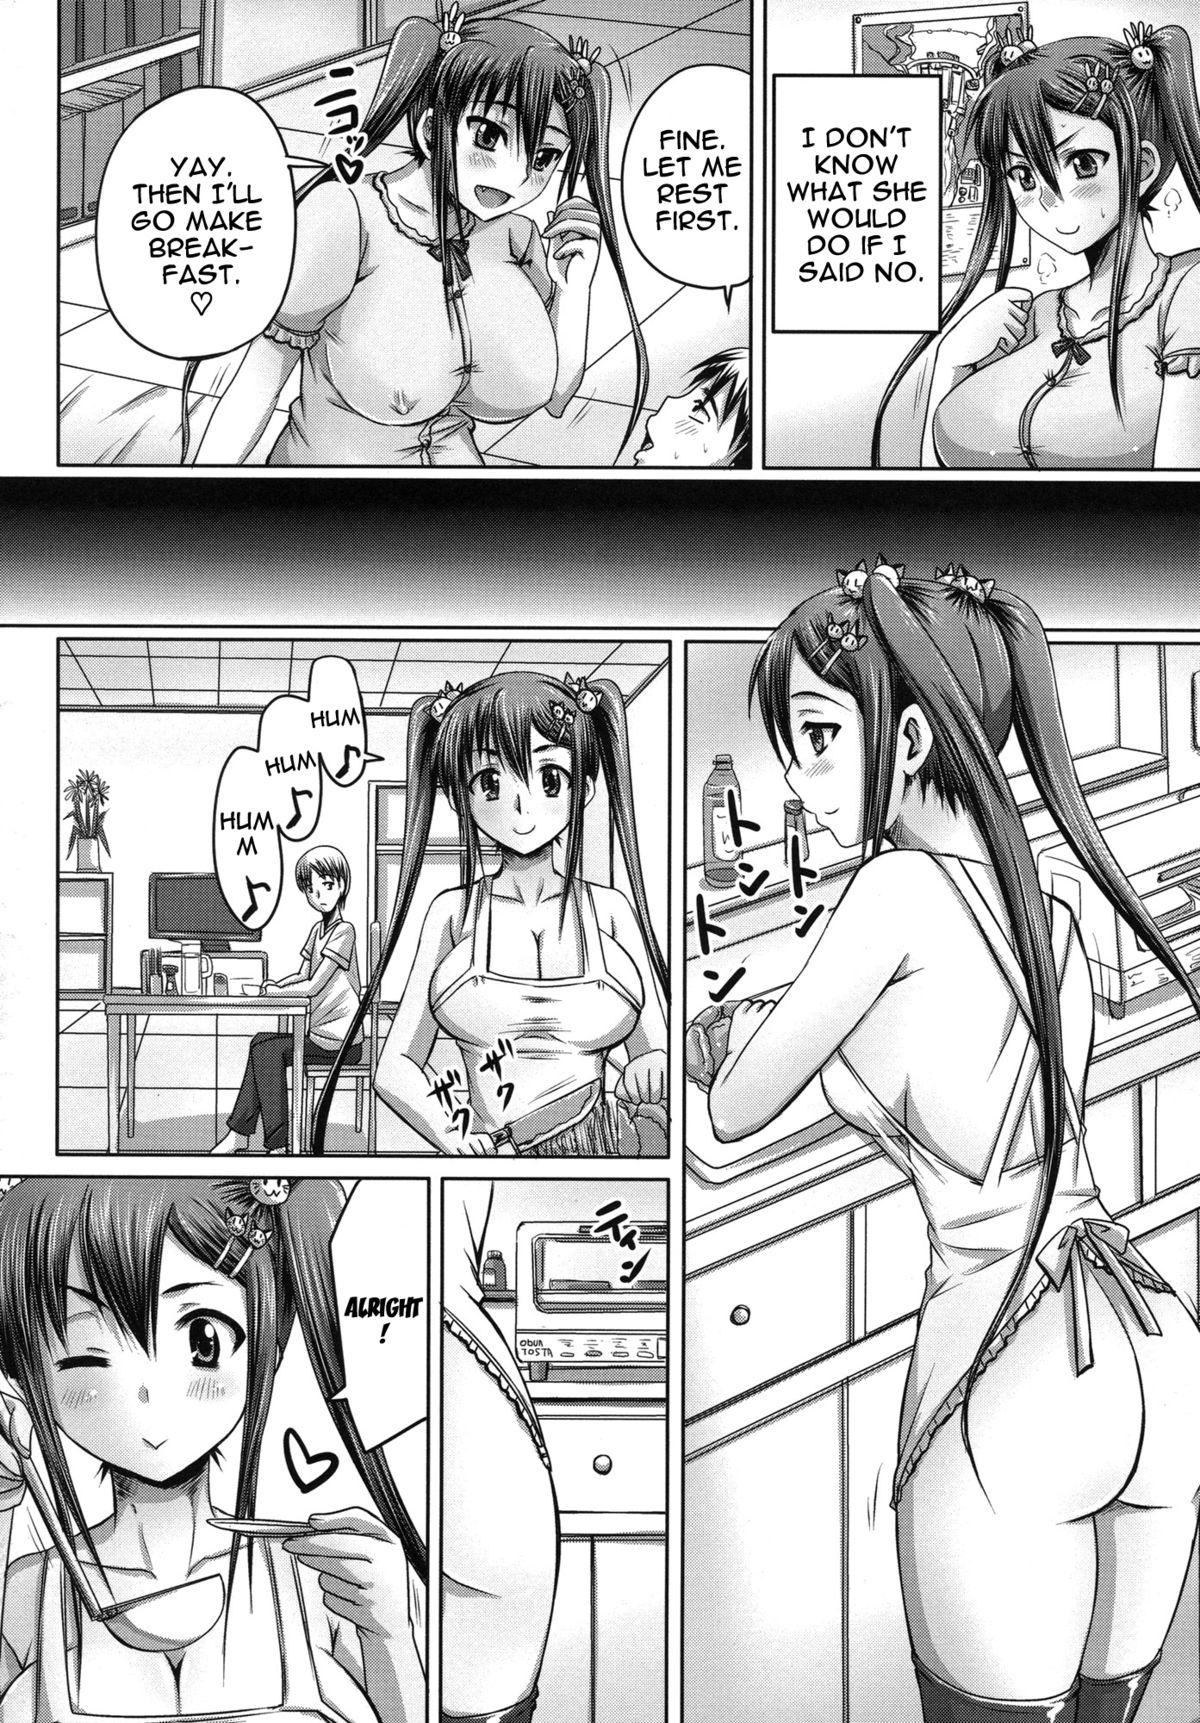 [Akigami Satoru] Tsukurou! Onaho Ane - Let's made a Sex Sleeve from Sister | Turning My Elder-Sister into a Sex-Sleeve [English] {doujin-moe.us} 106